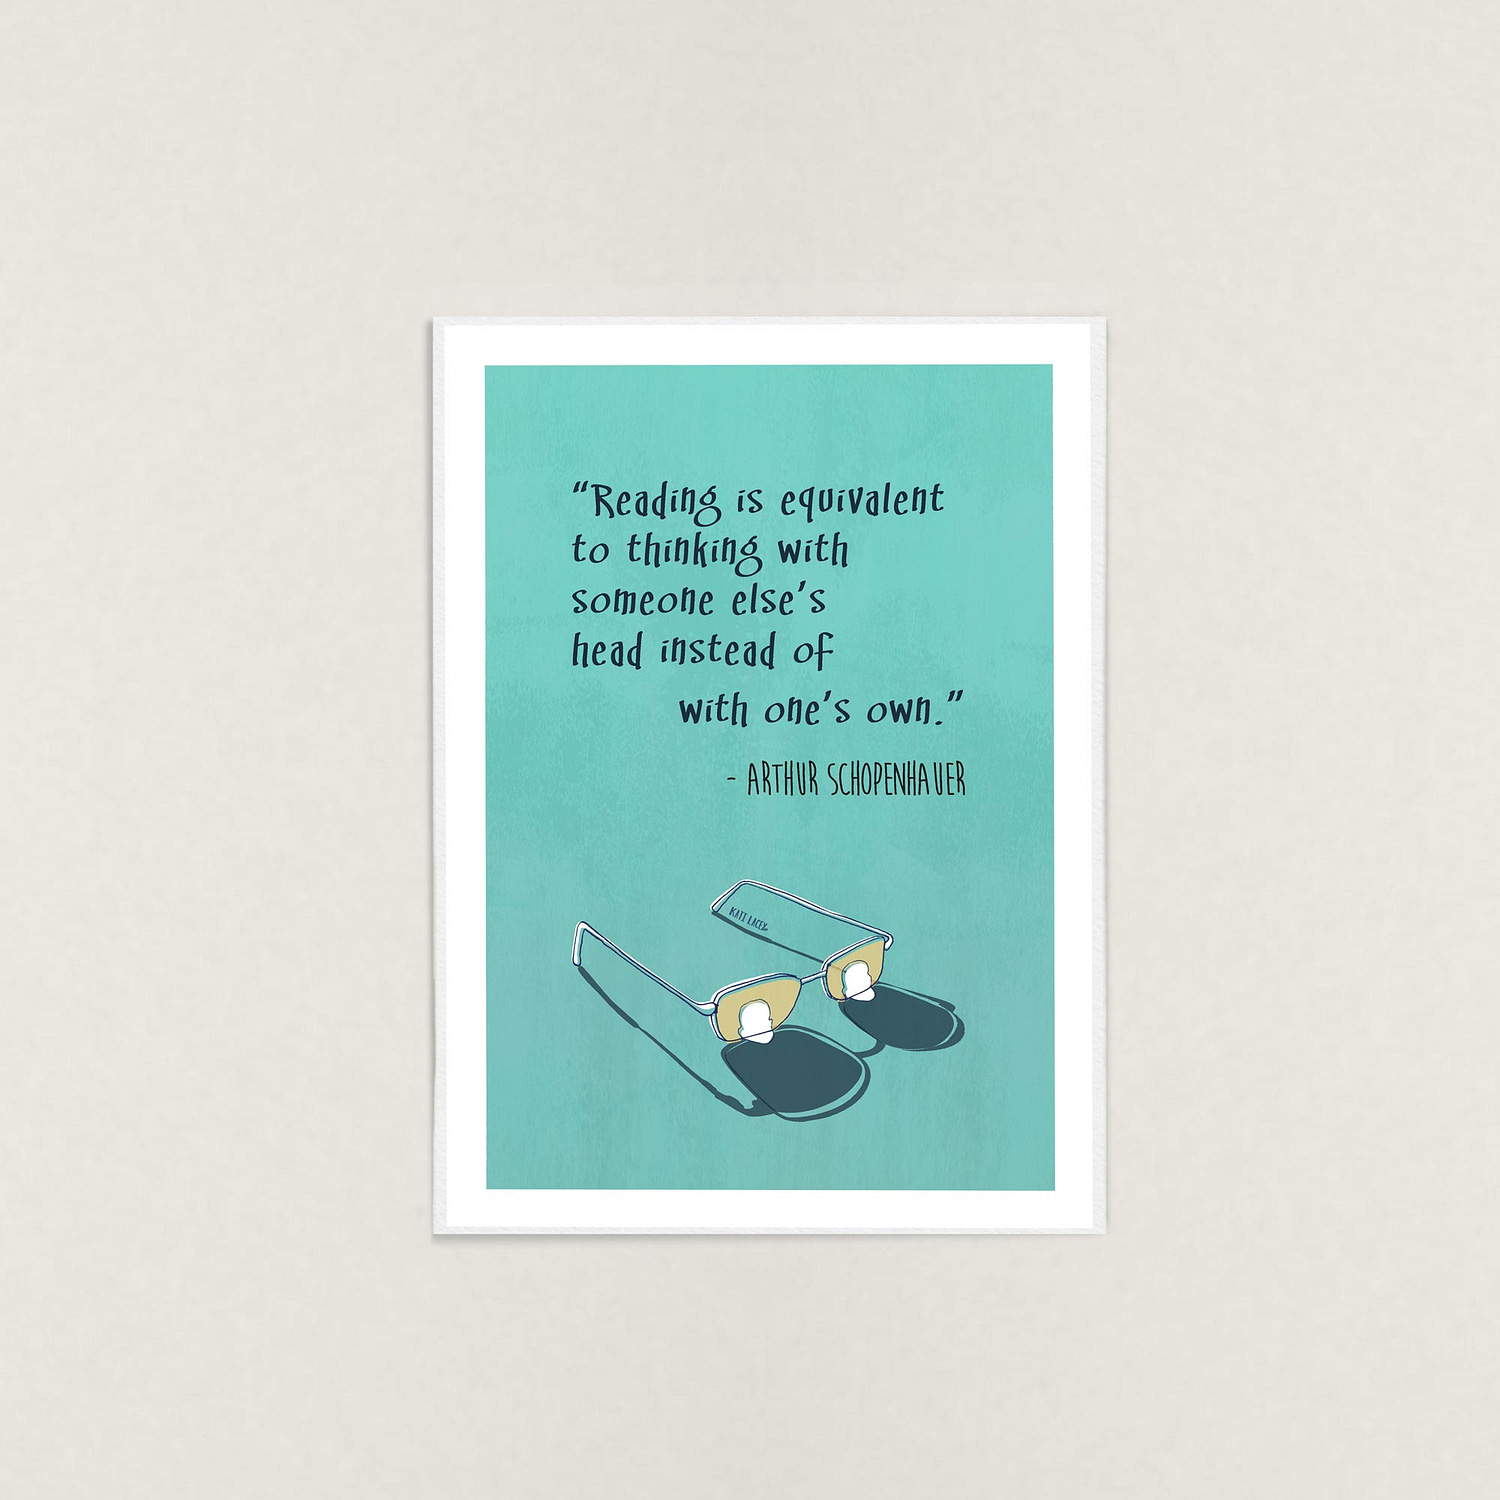 Schopenhauer-Quote-Illustration-Wall-Art-Print-by-Kati-Lacey Illustration-about-reading-and-thinking